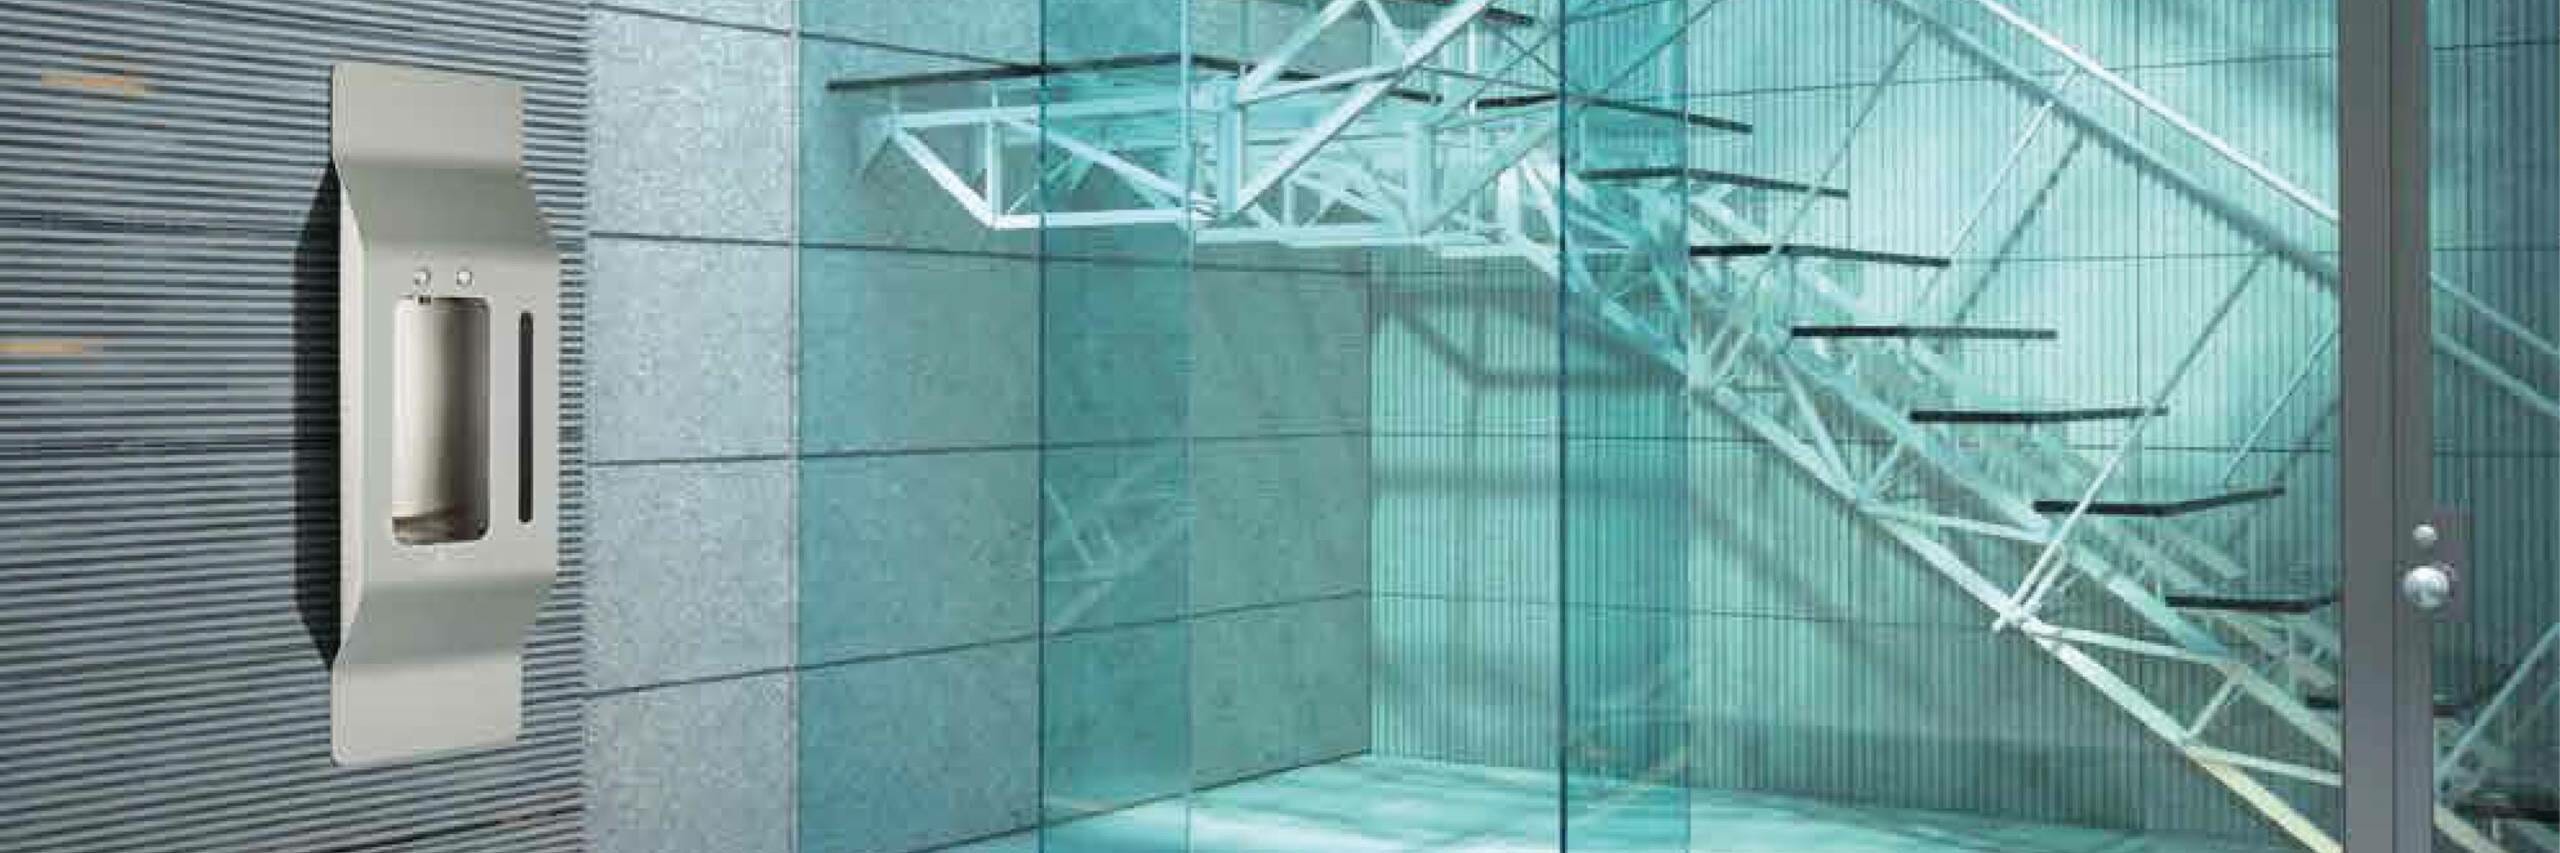 A bluedrop water wall product on a wall in a building.